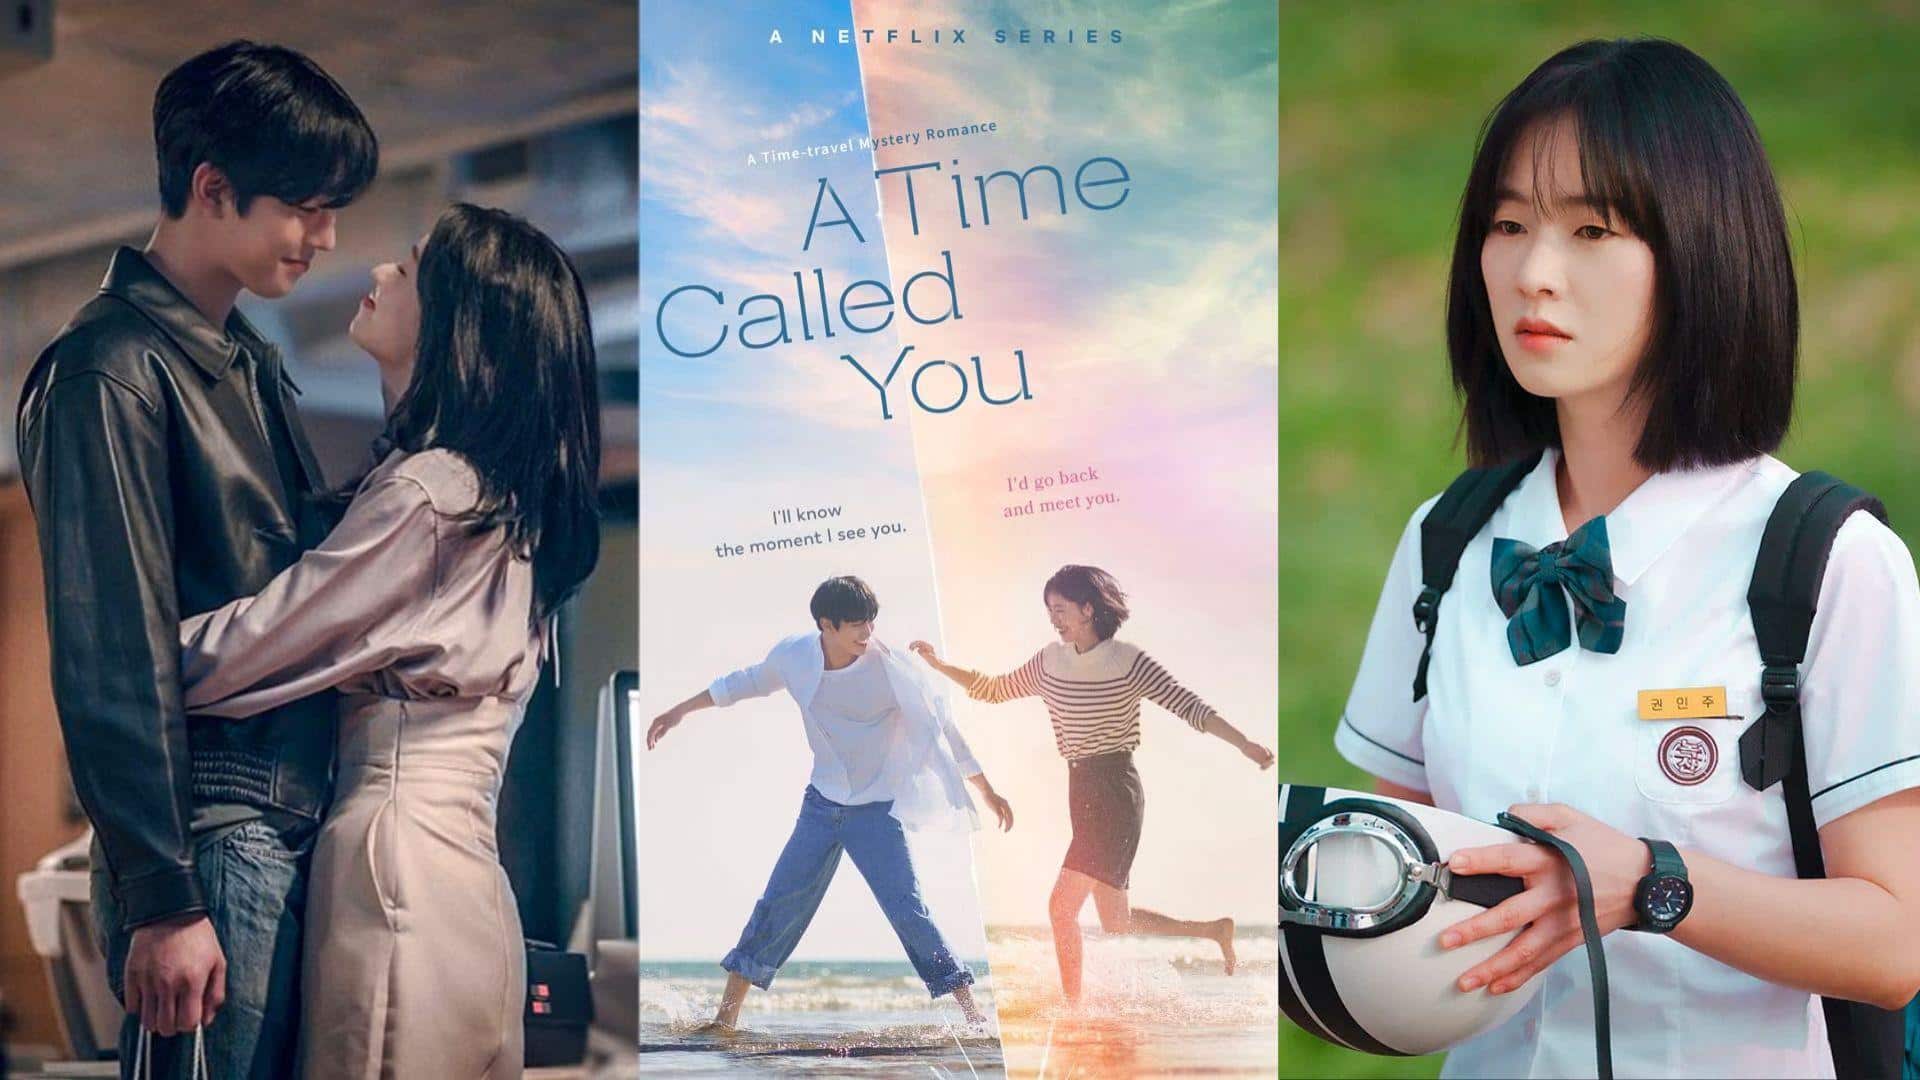 K-drama: What makes Netflix's 'A Time Called You' a must-watch